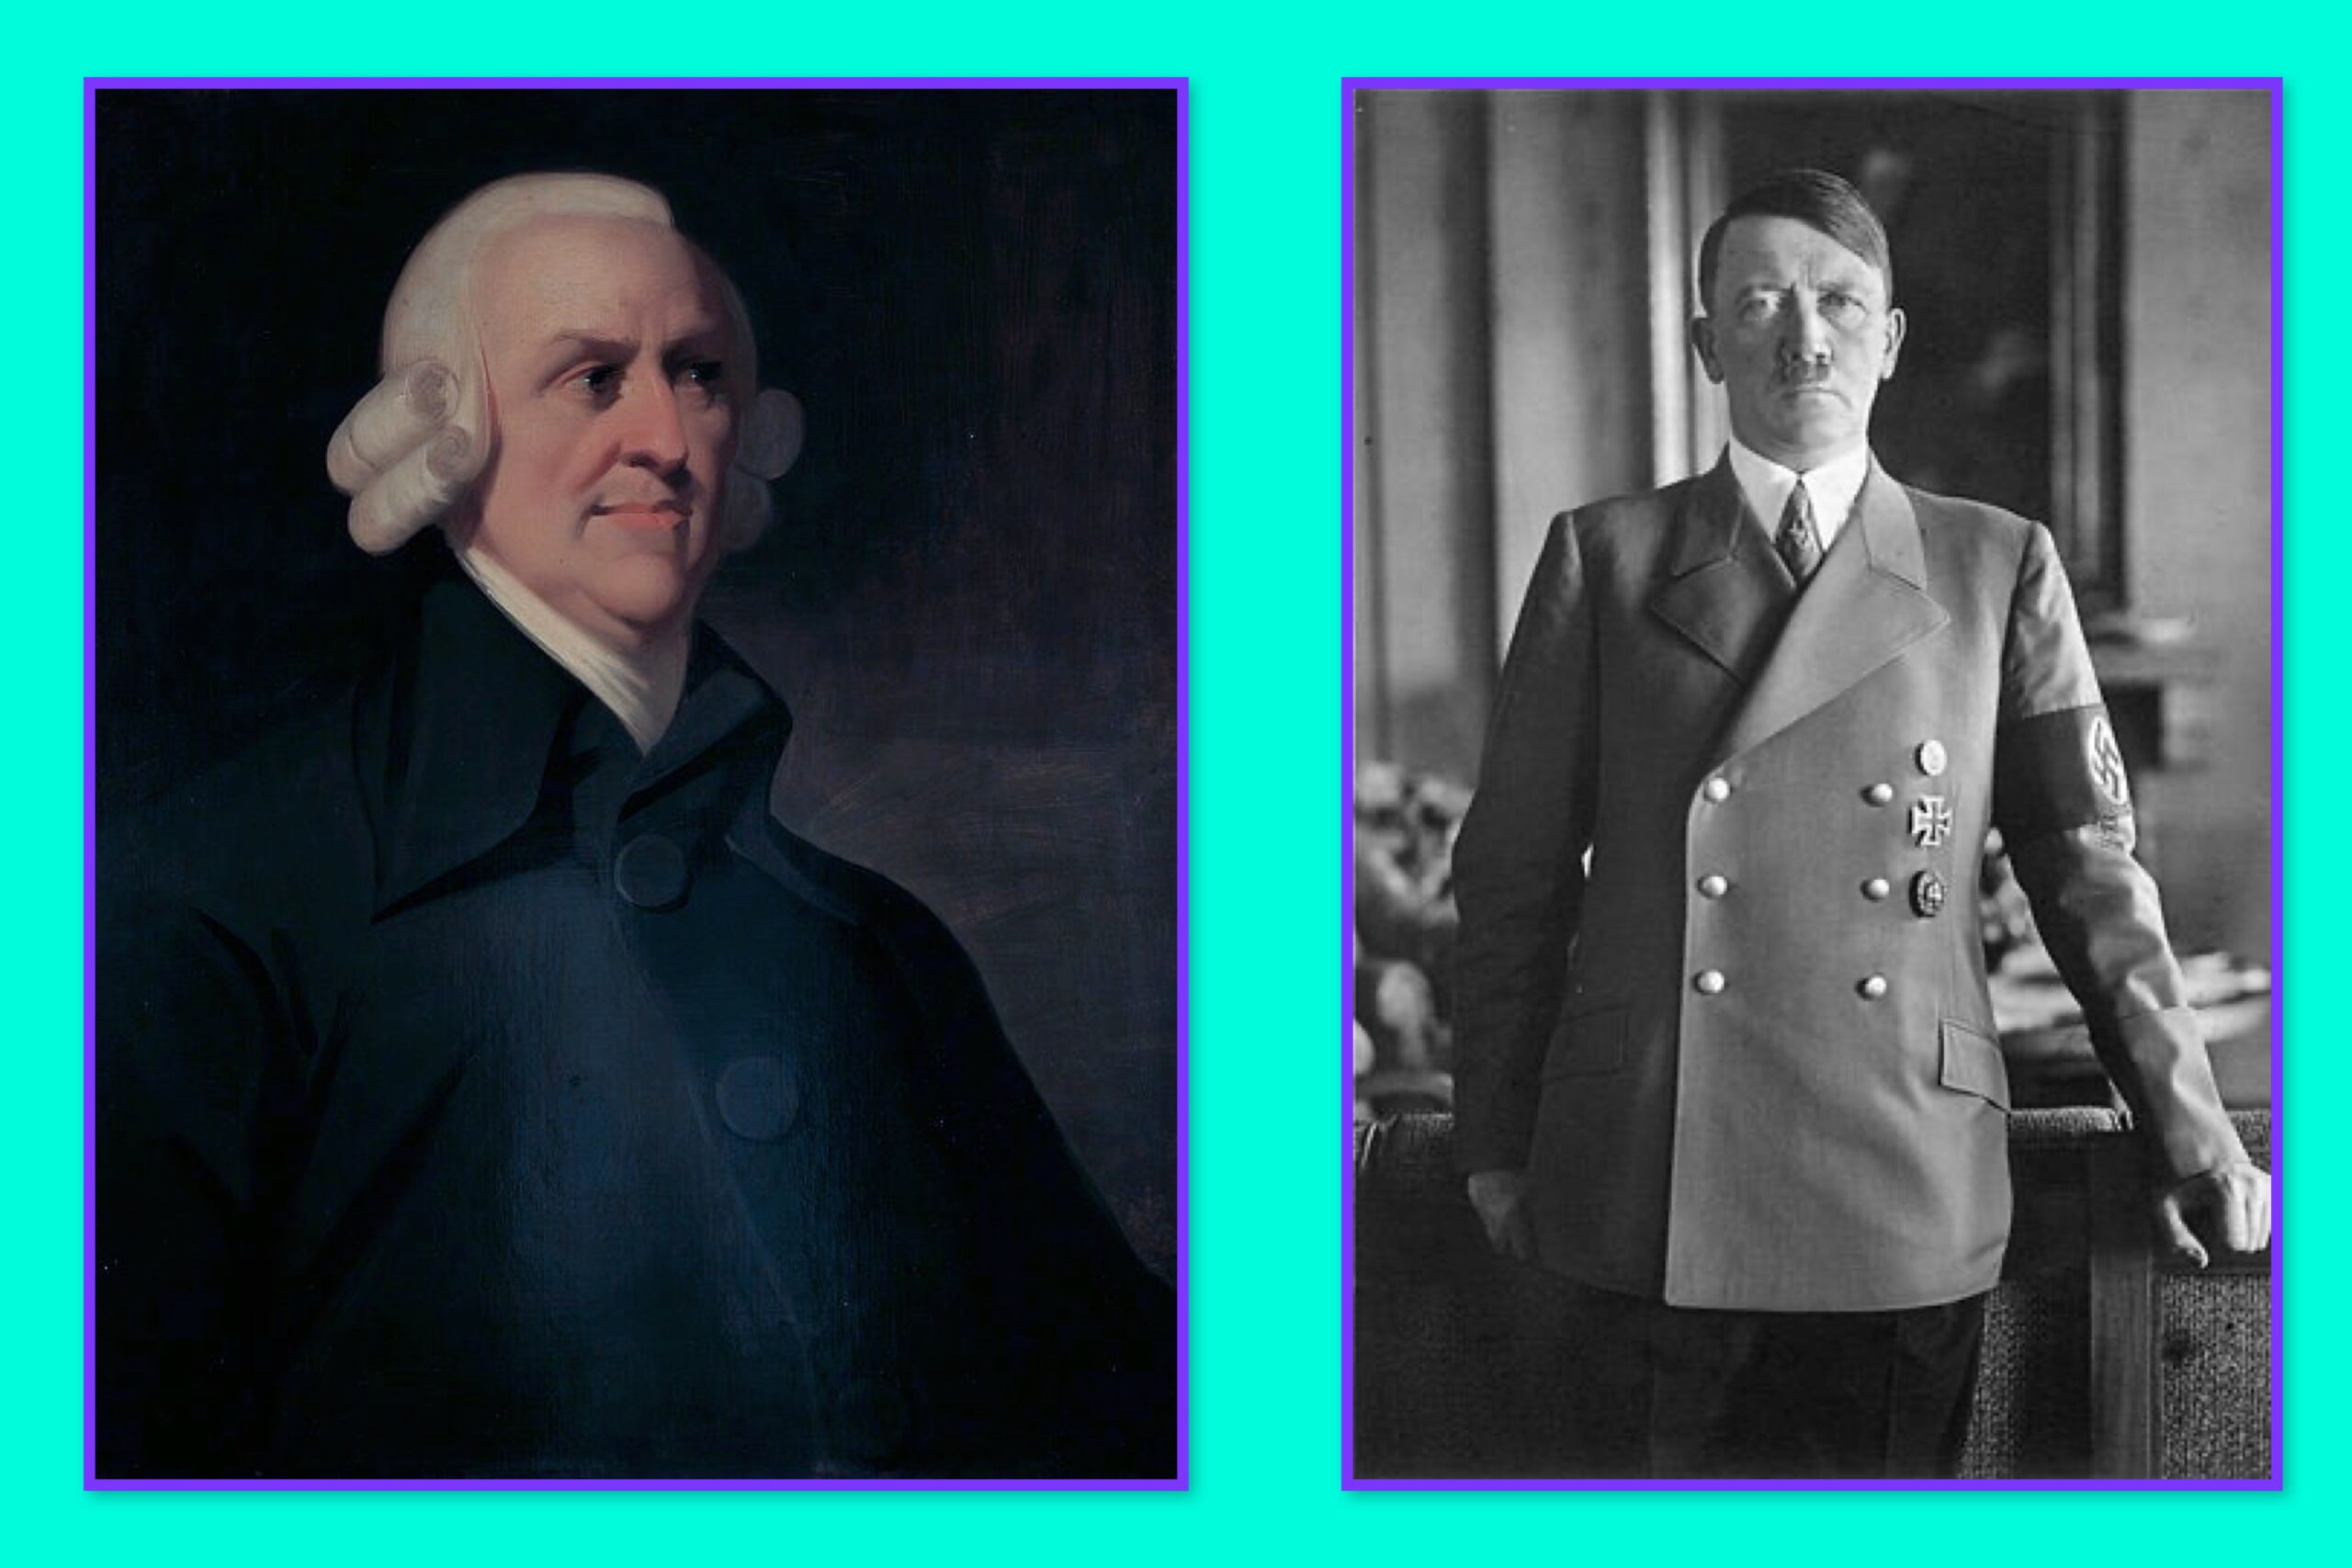 Adam Smith, the father of free-market capitalism, and Adolph Hitler, a practitioner of crony capitalism